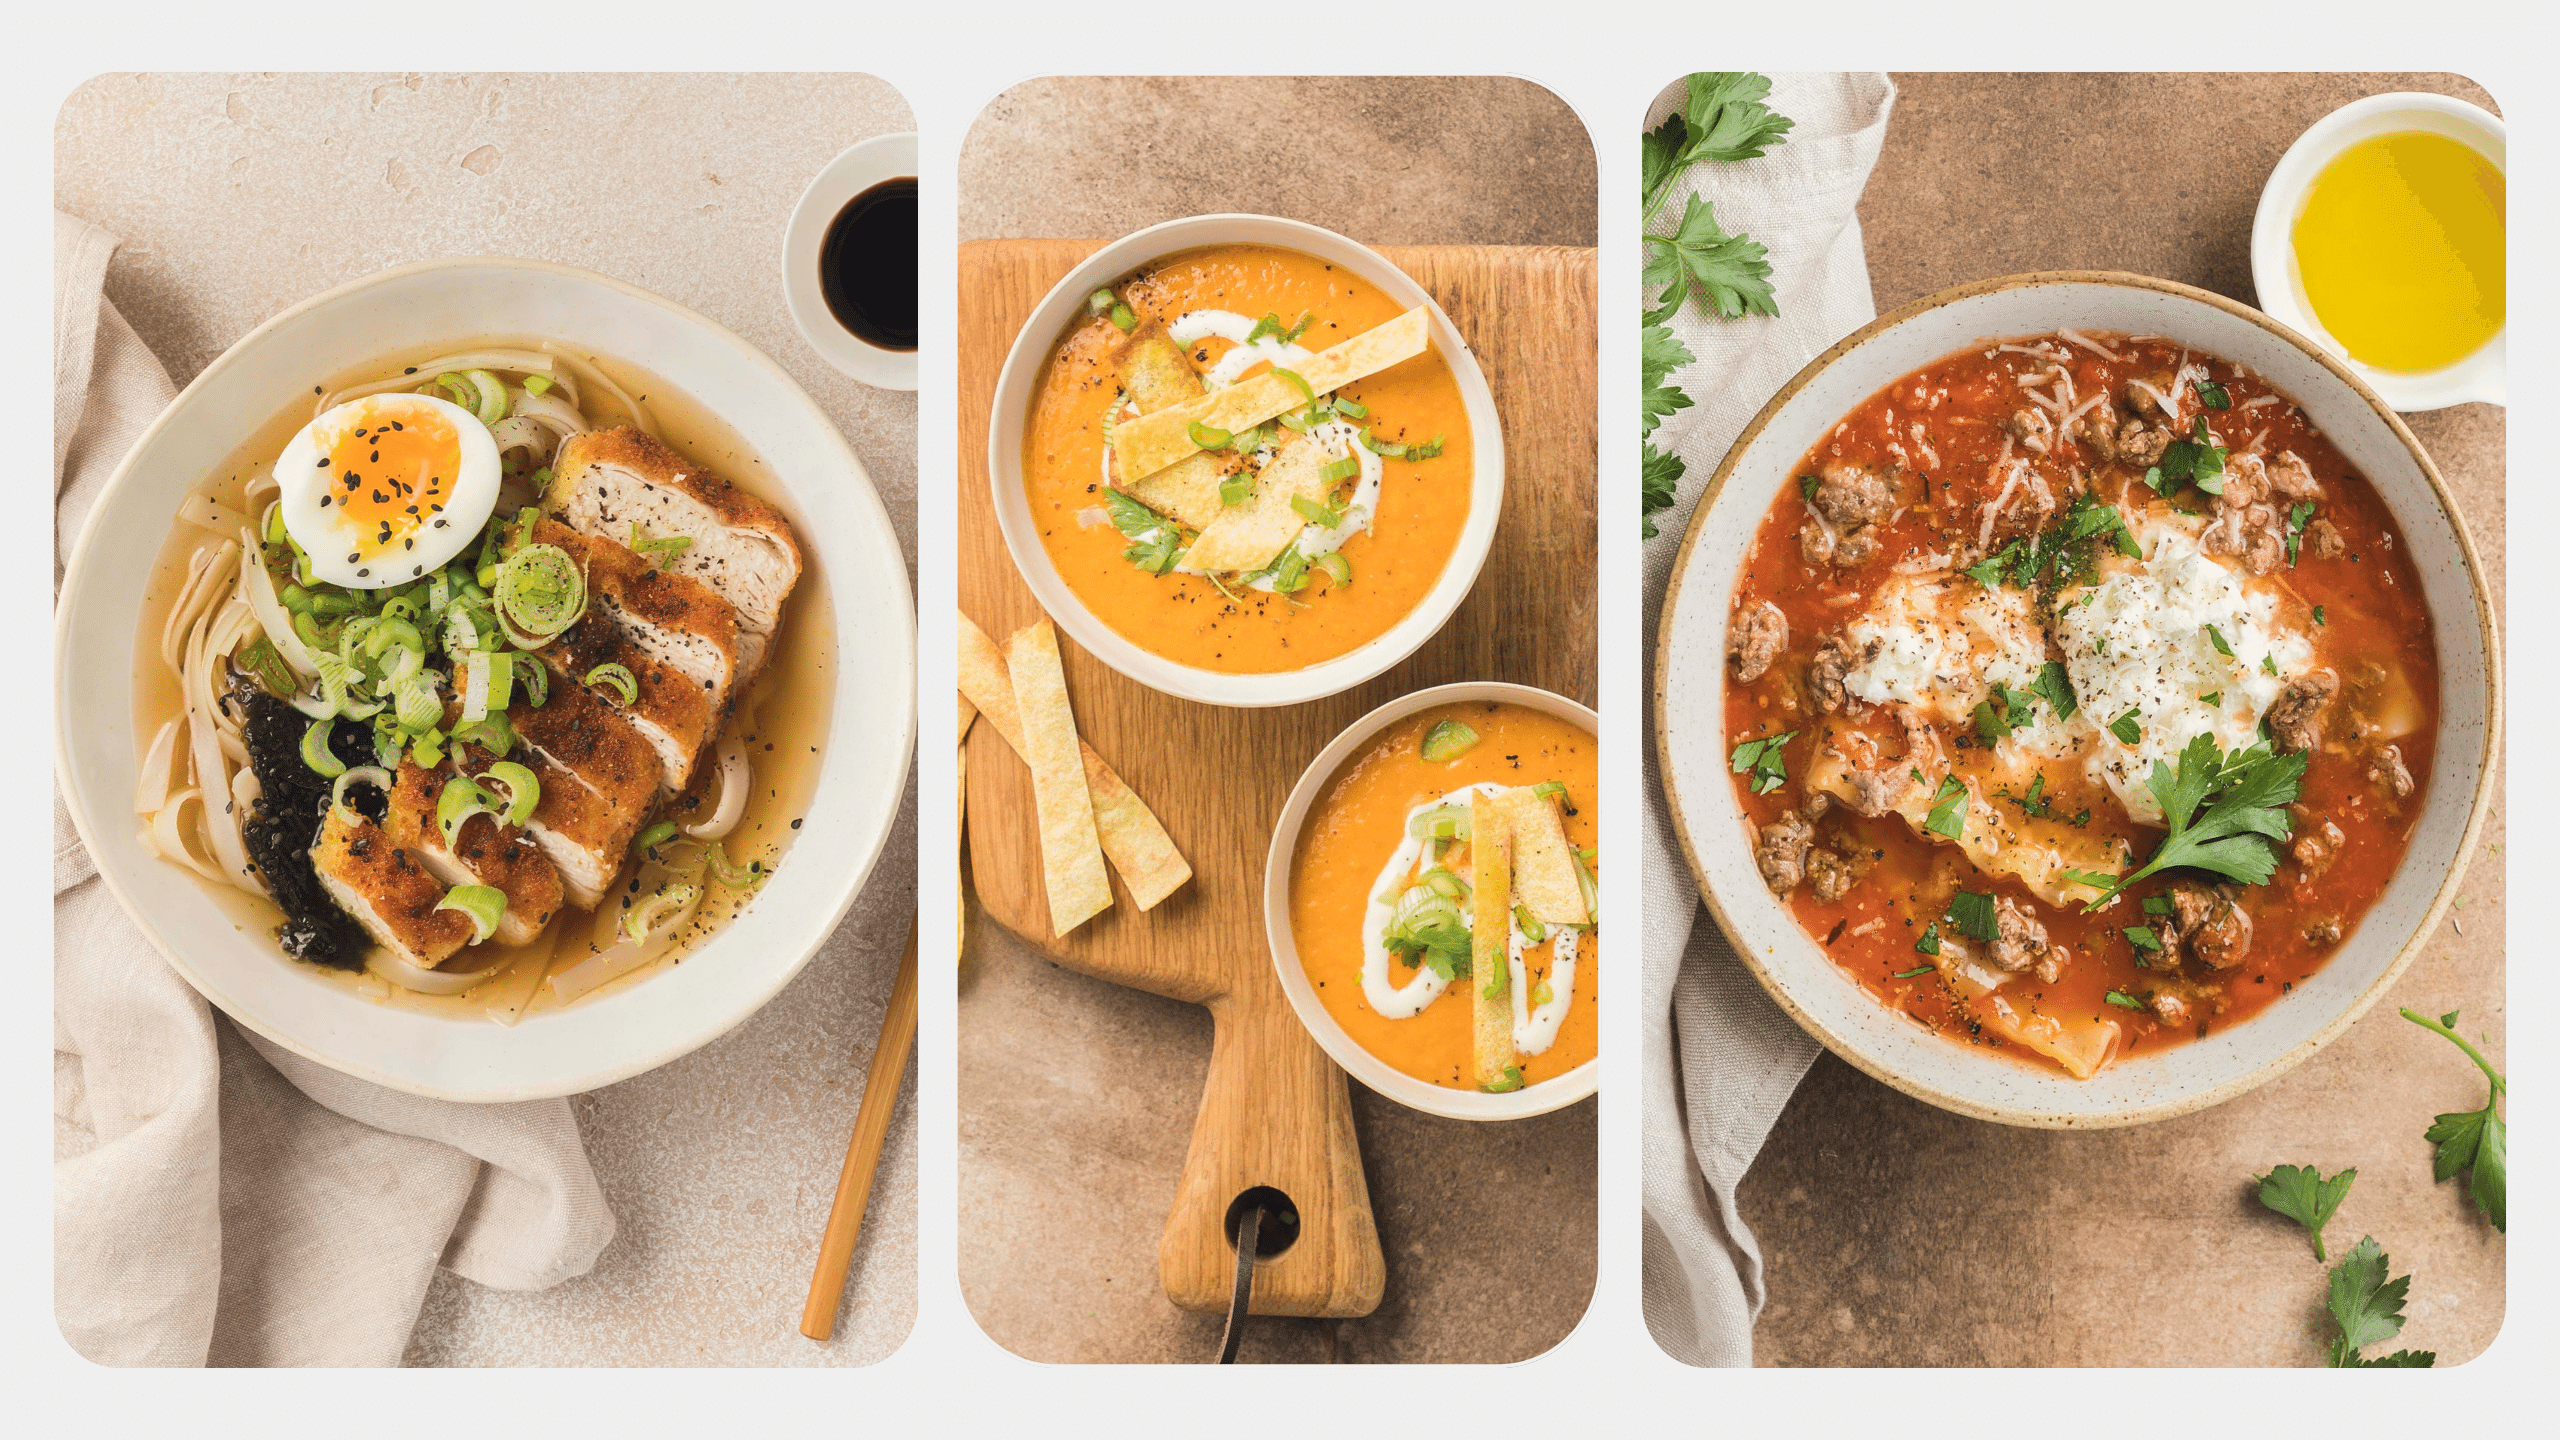 Warm up this winter with these cosy soups